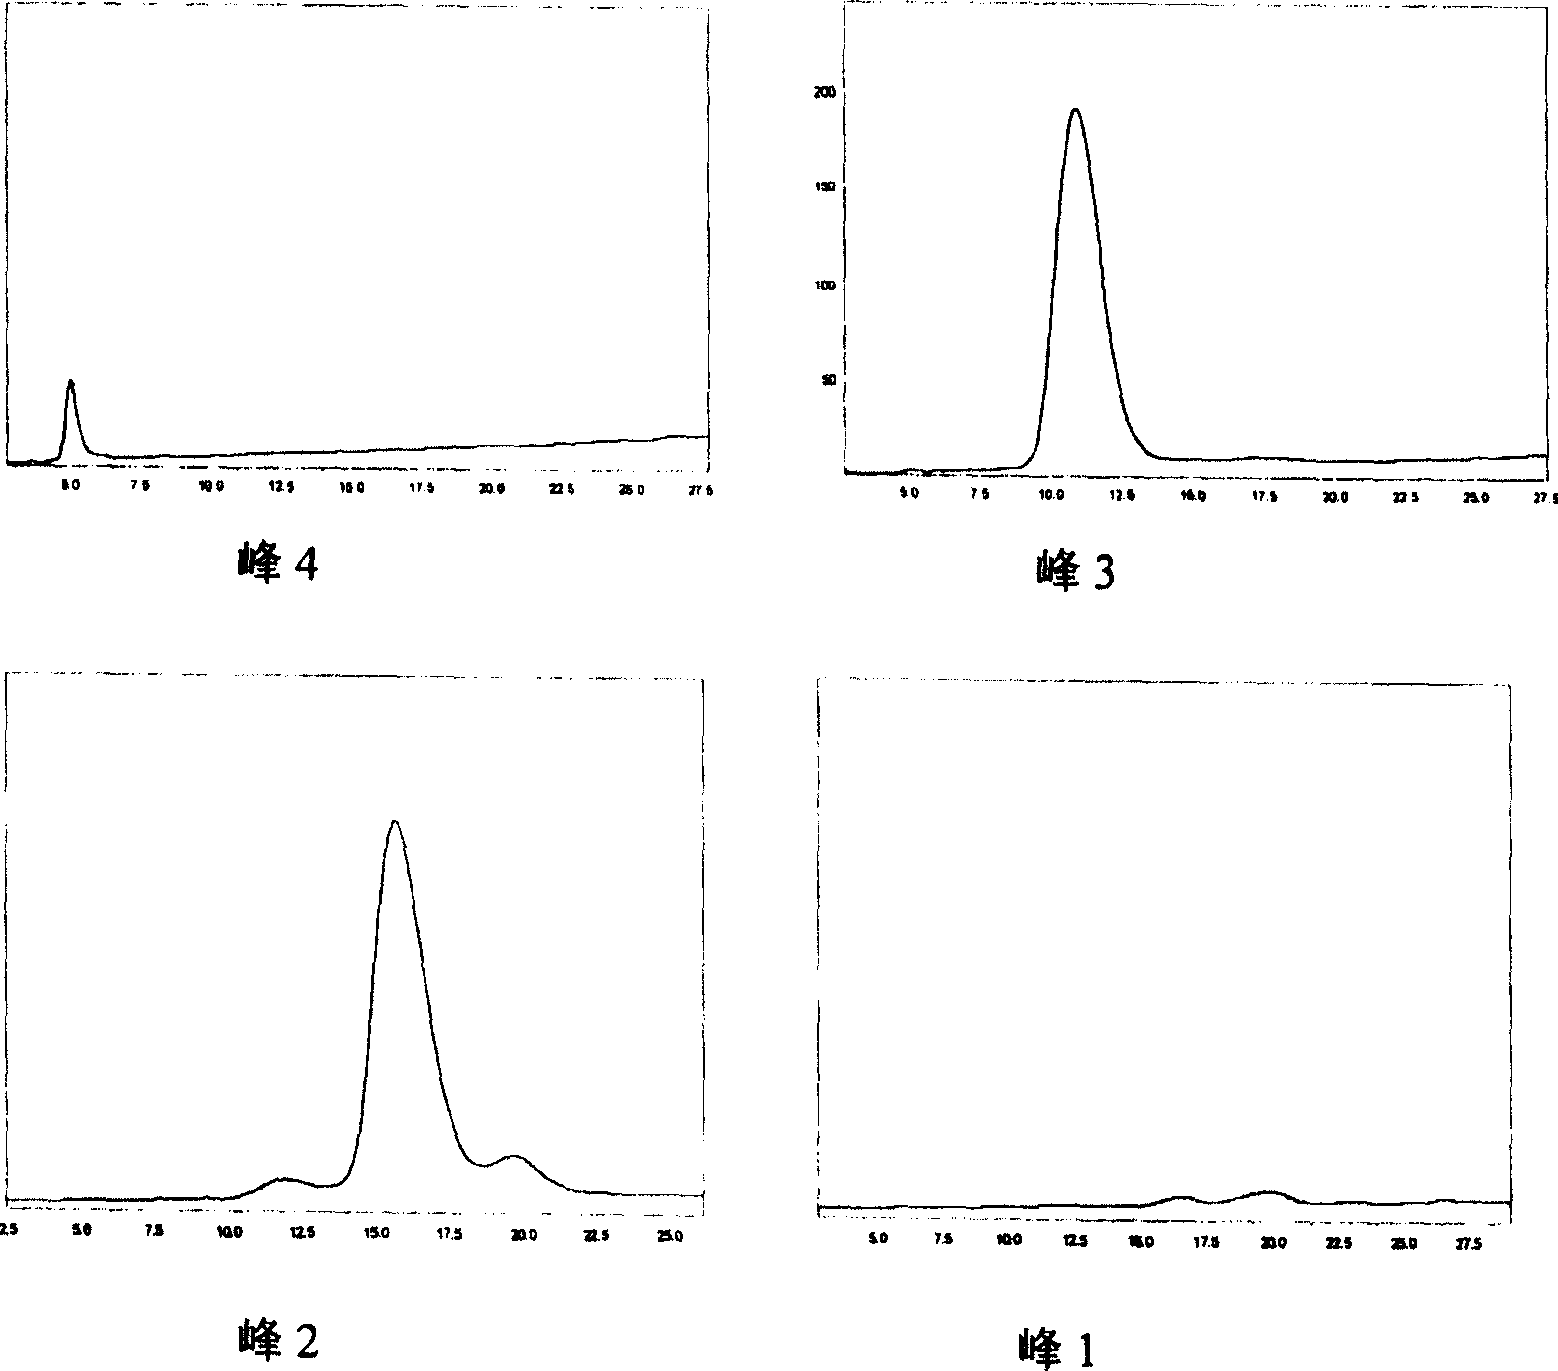 Monomodified PEGylated insulin and its preparation method